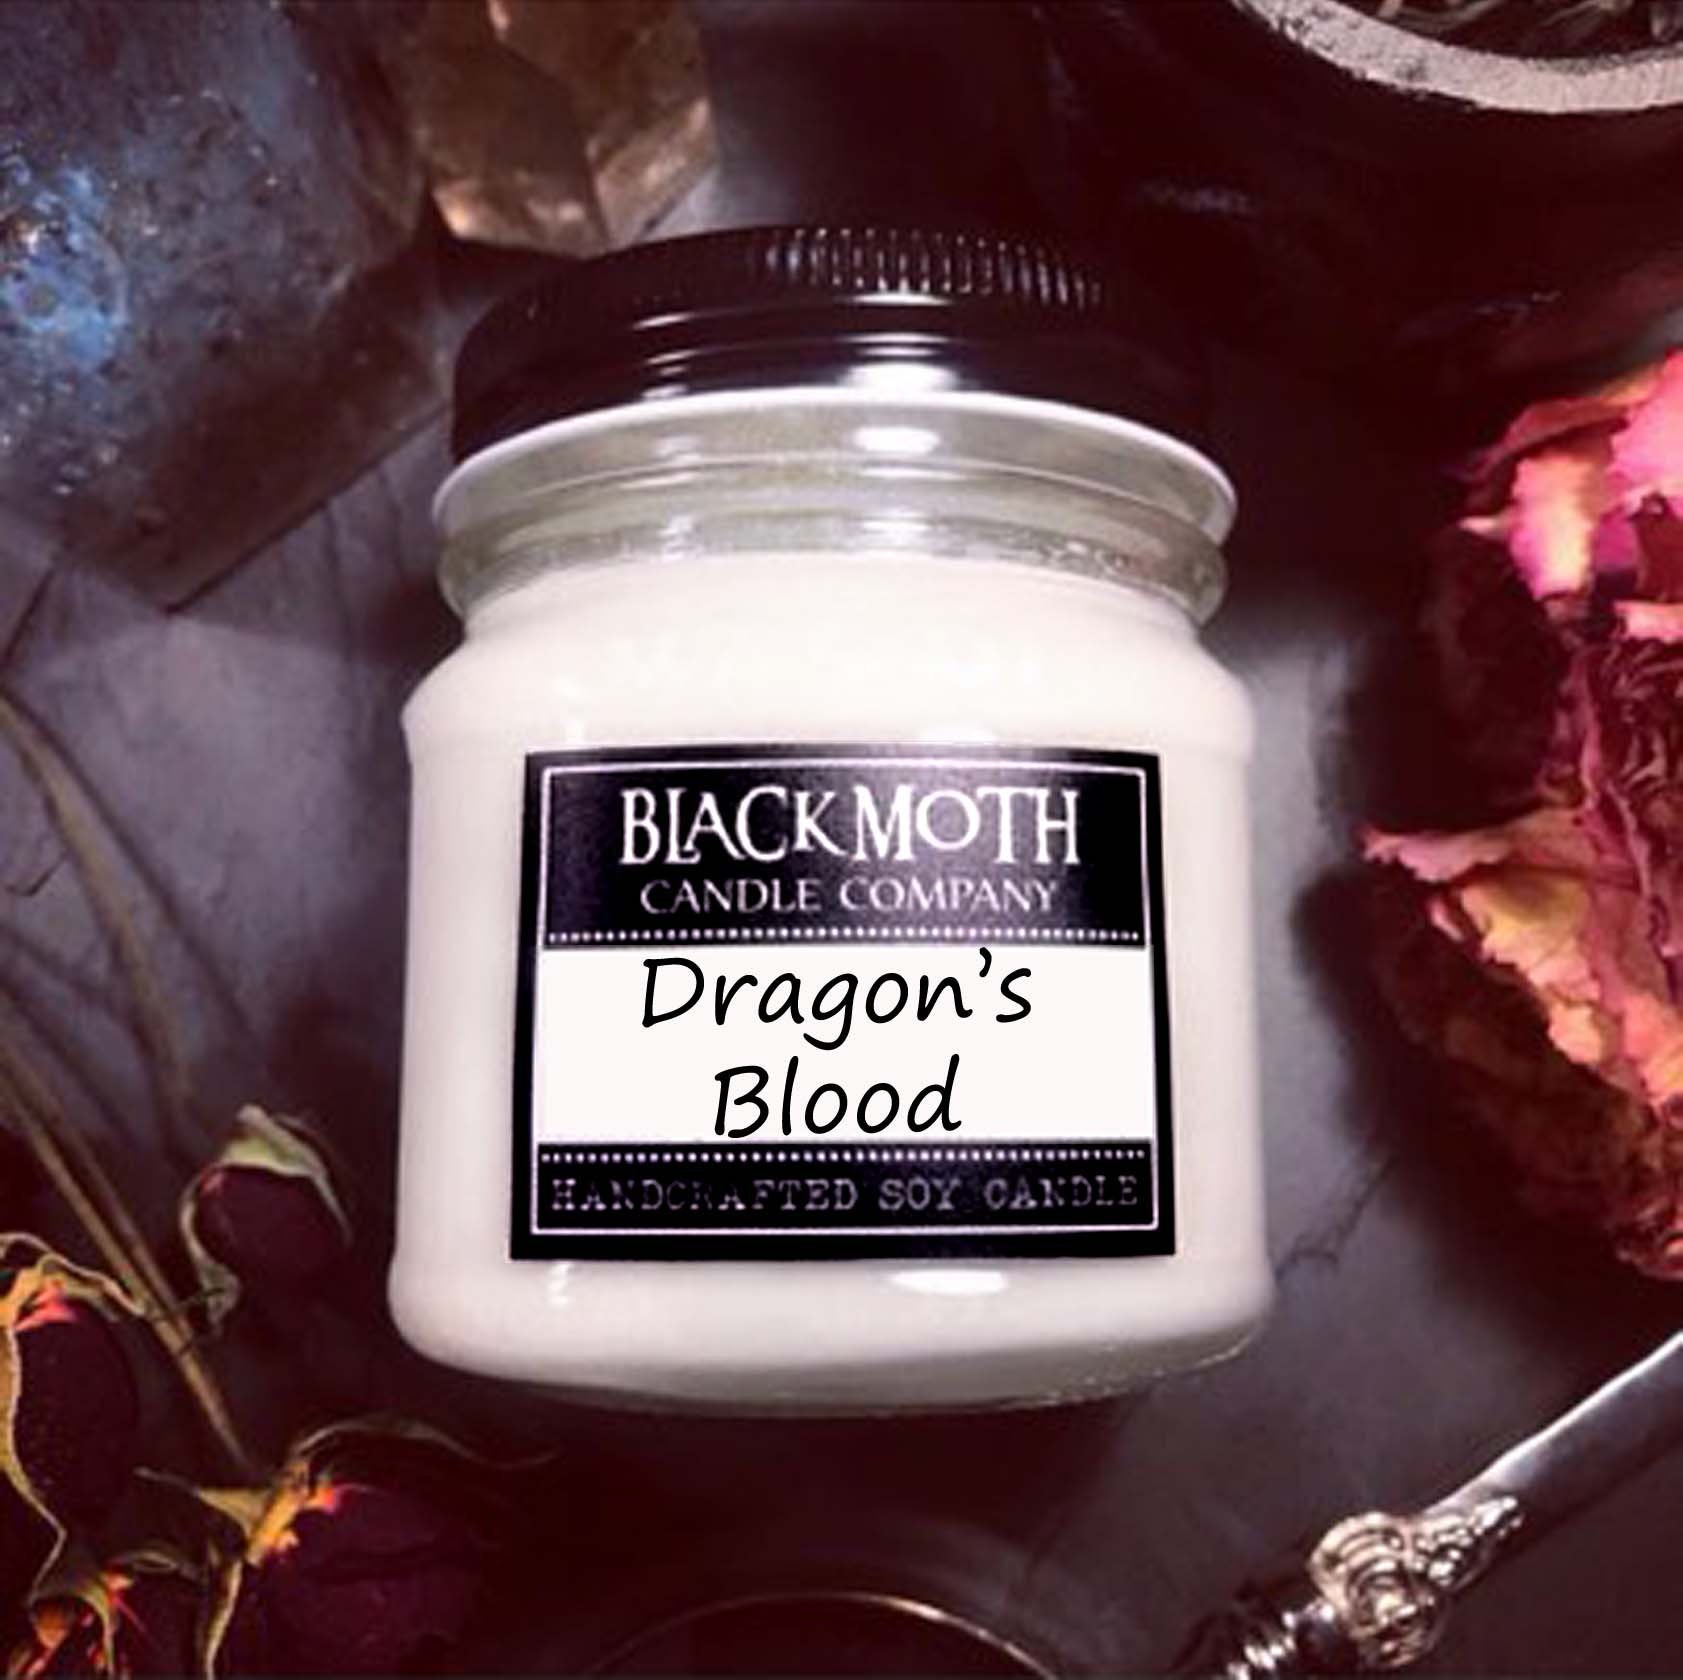 8 oz Dragon's Blood Scented Soy Candle in Mason Jar